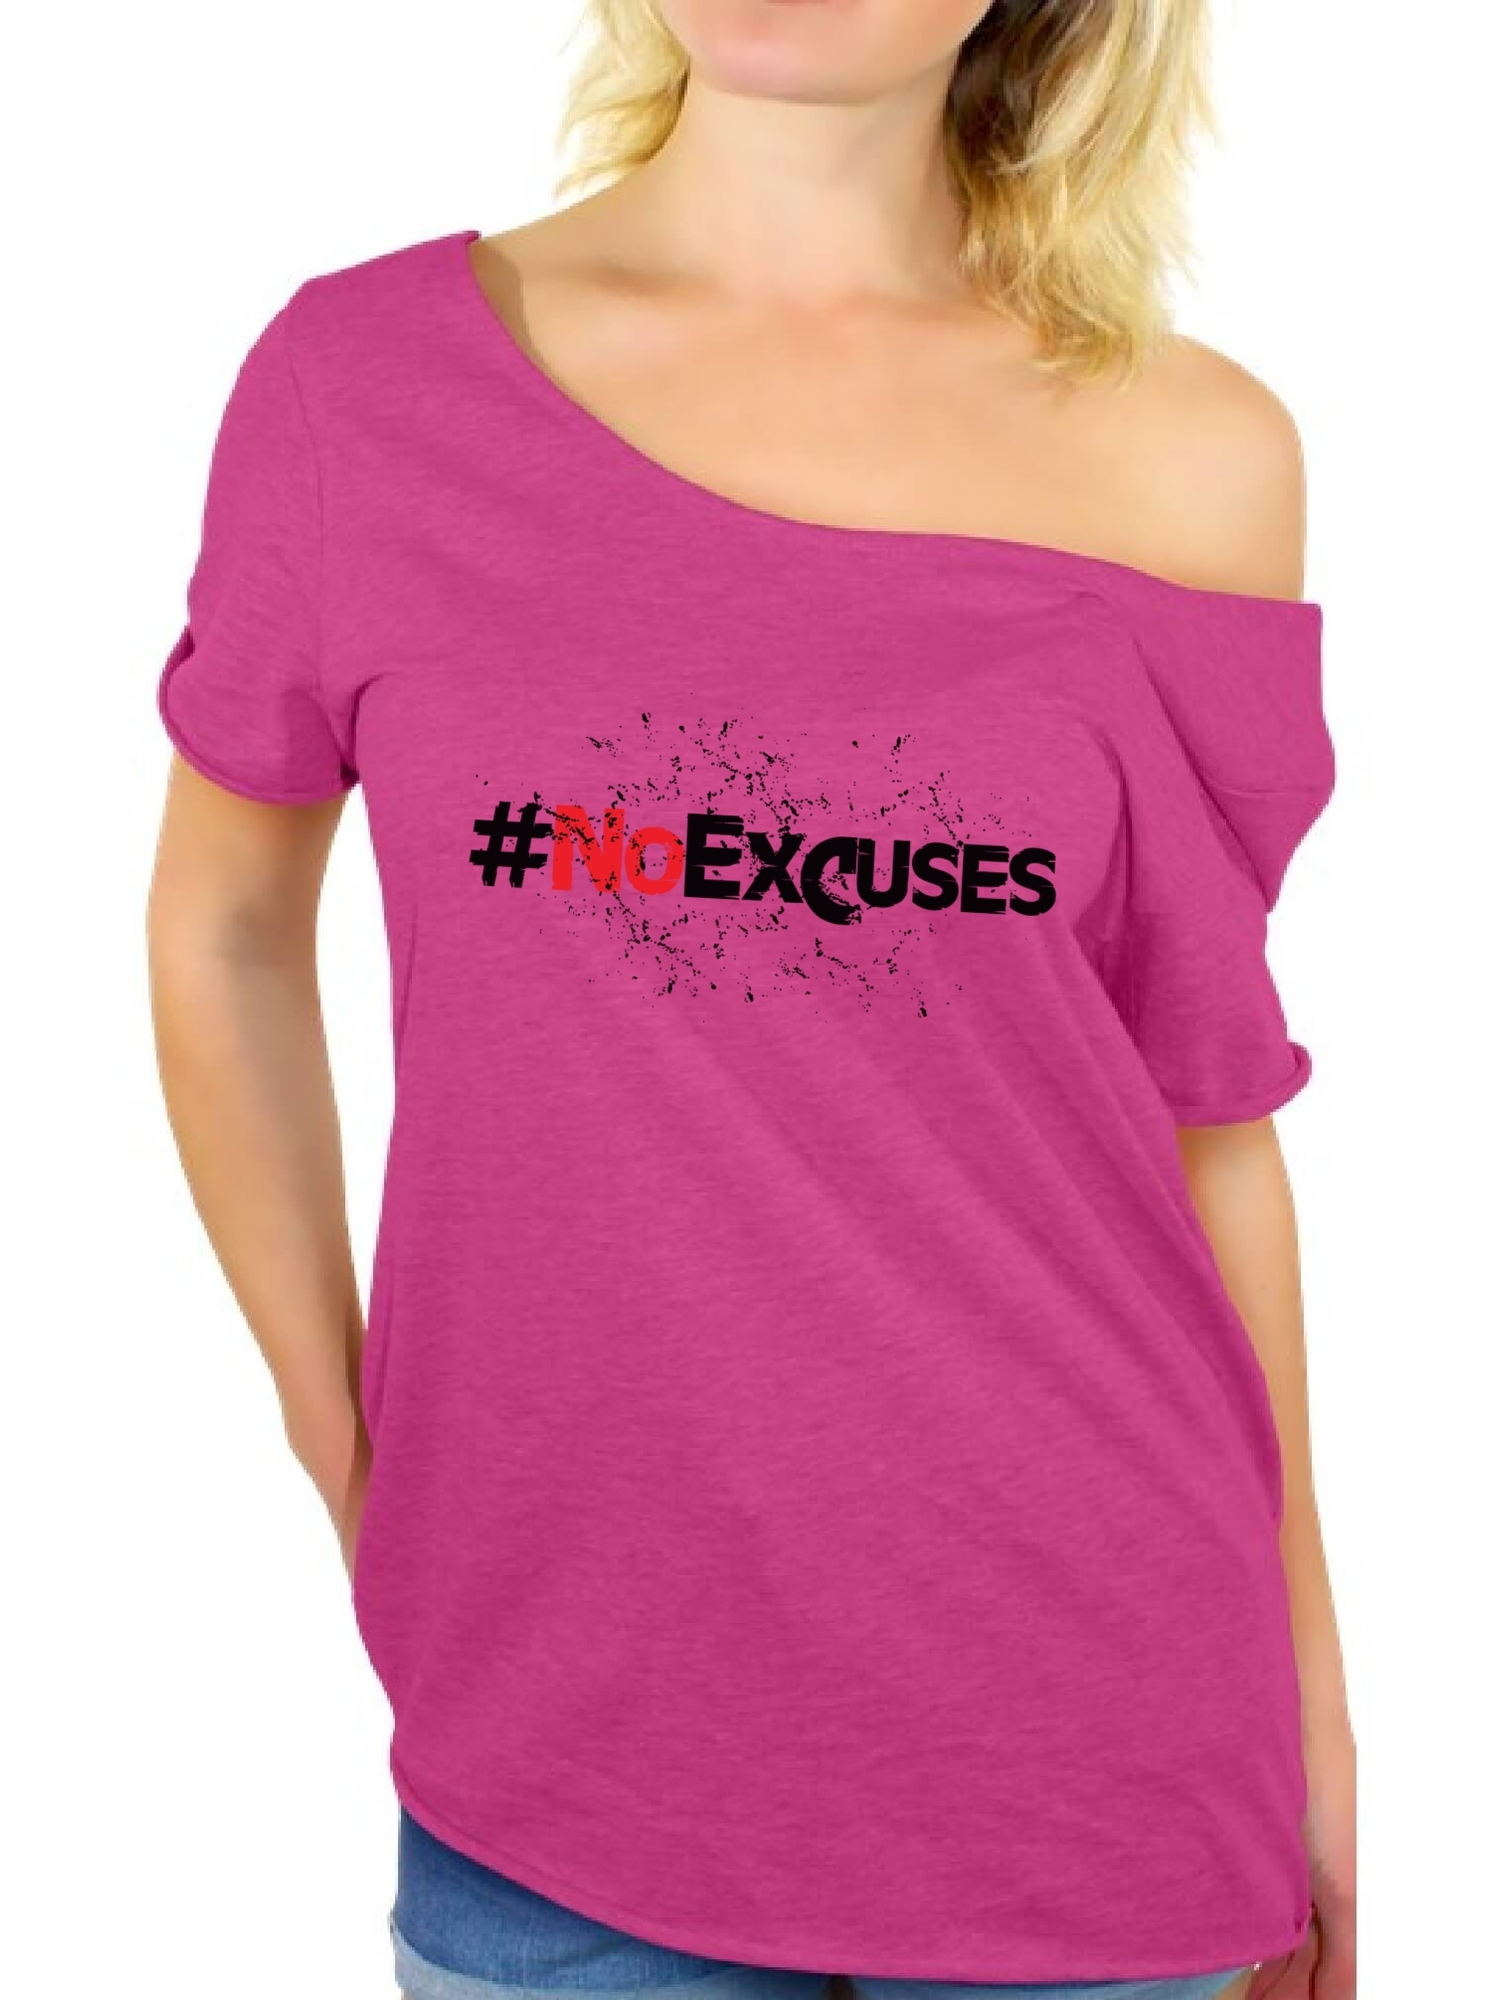 Awkward Styles No Excuses Hashtag Graphic Off Shoulder Tops Tshirt for Women Fitness Gym Workout Motivational Tops - image 1 of 4